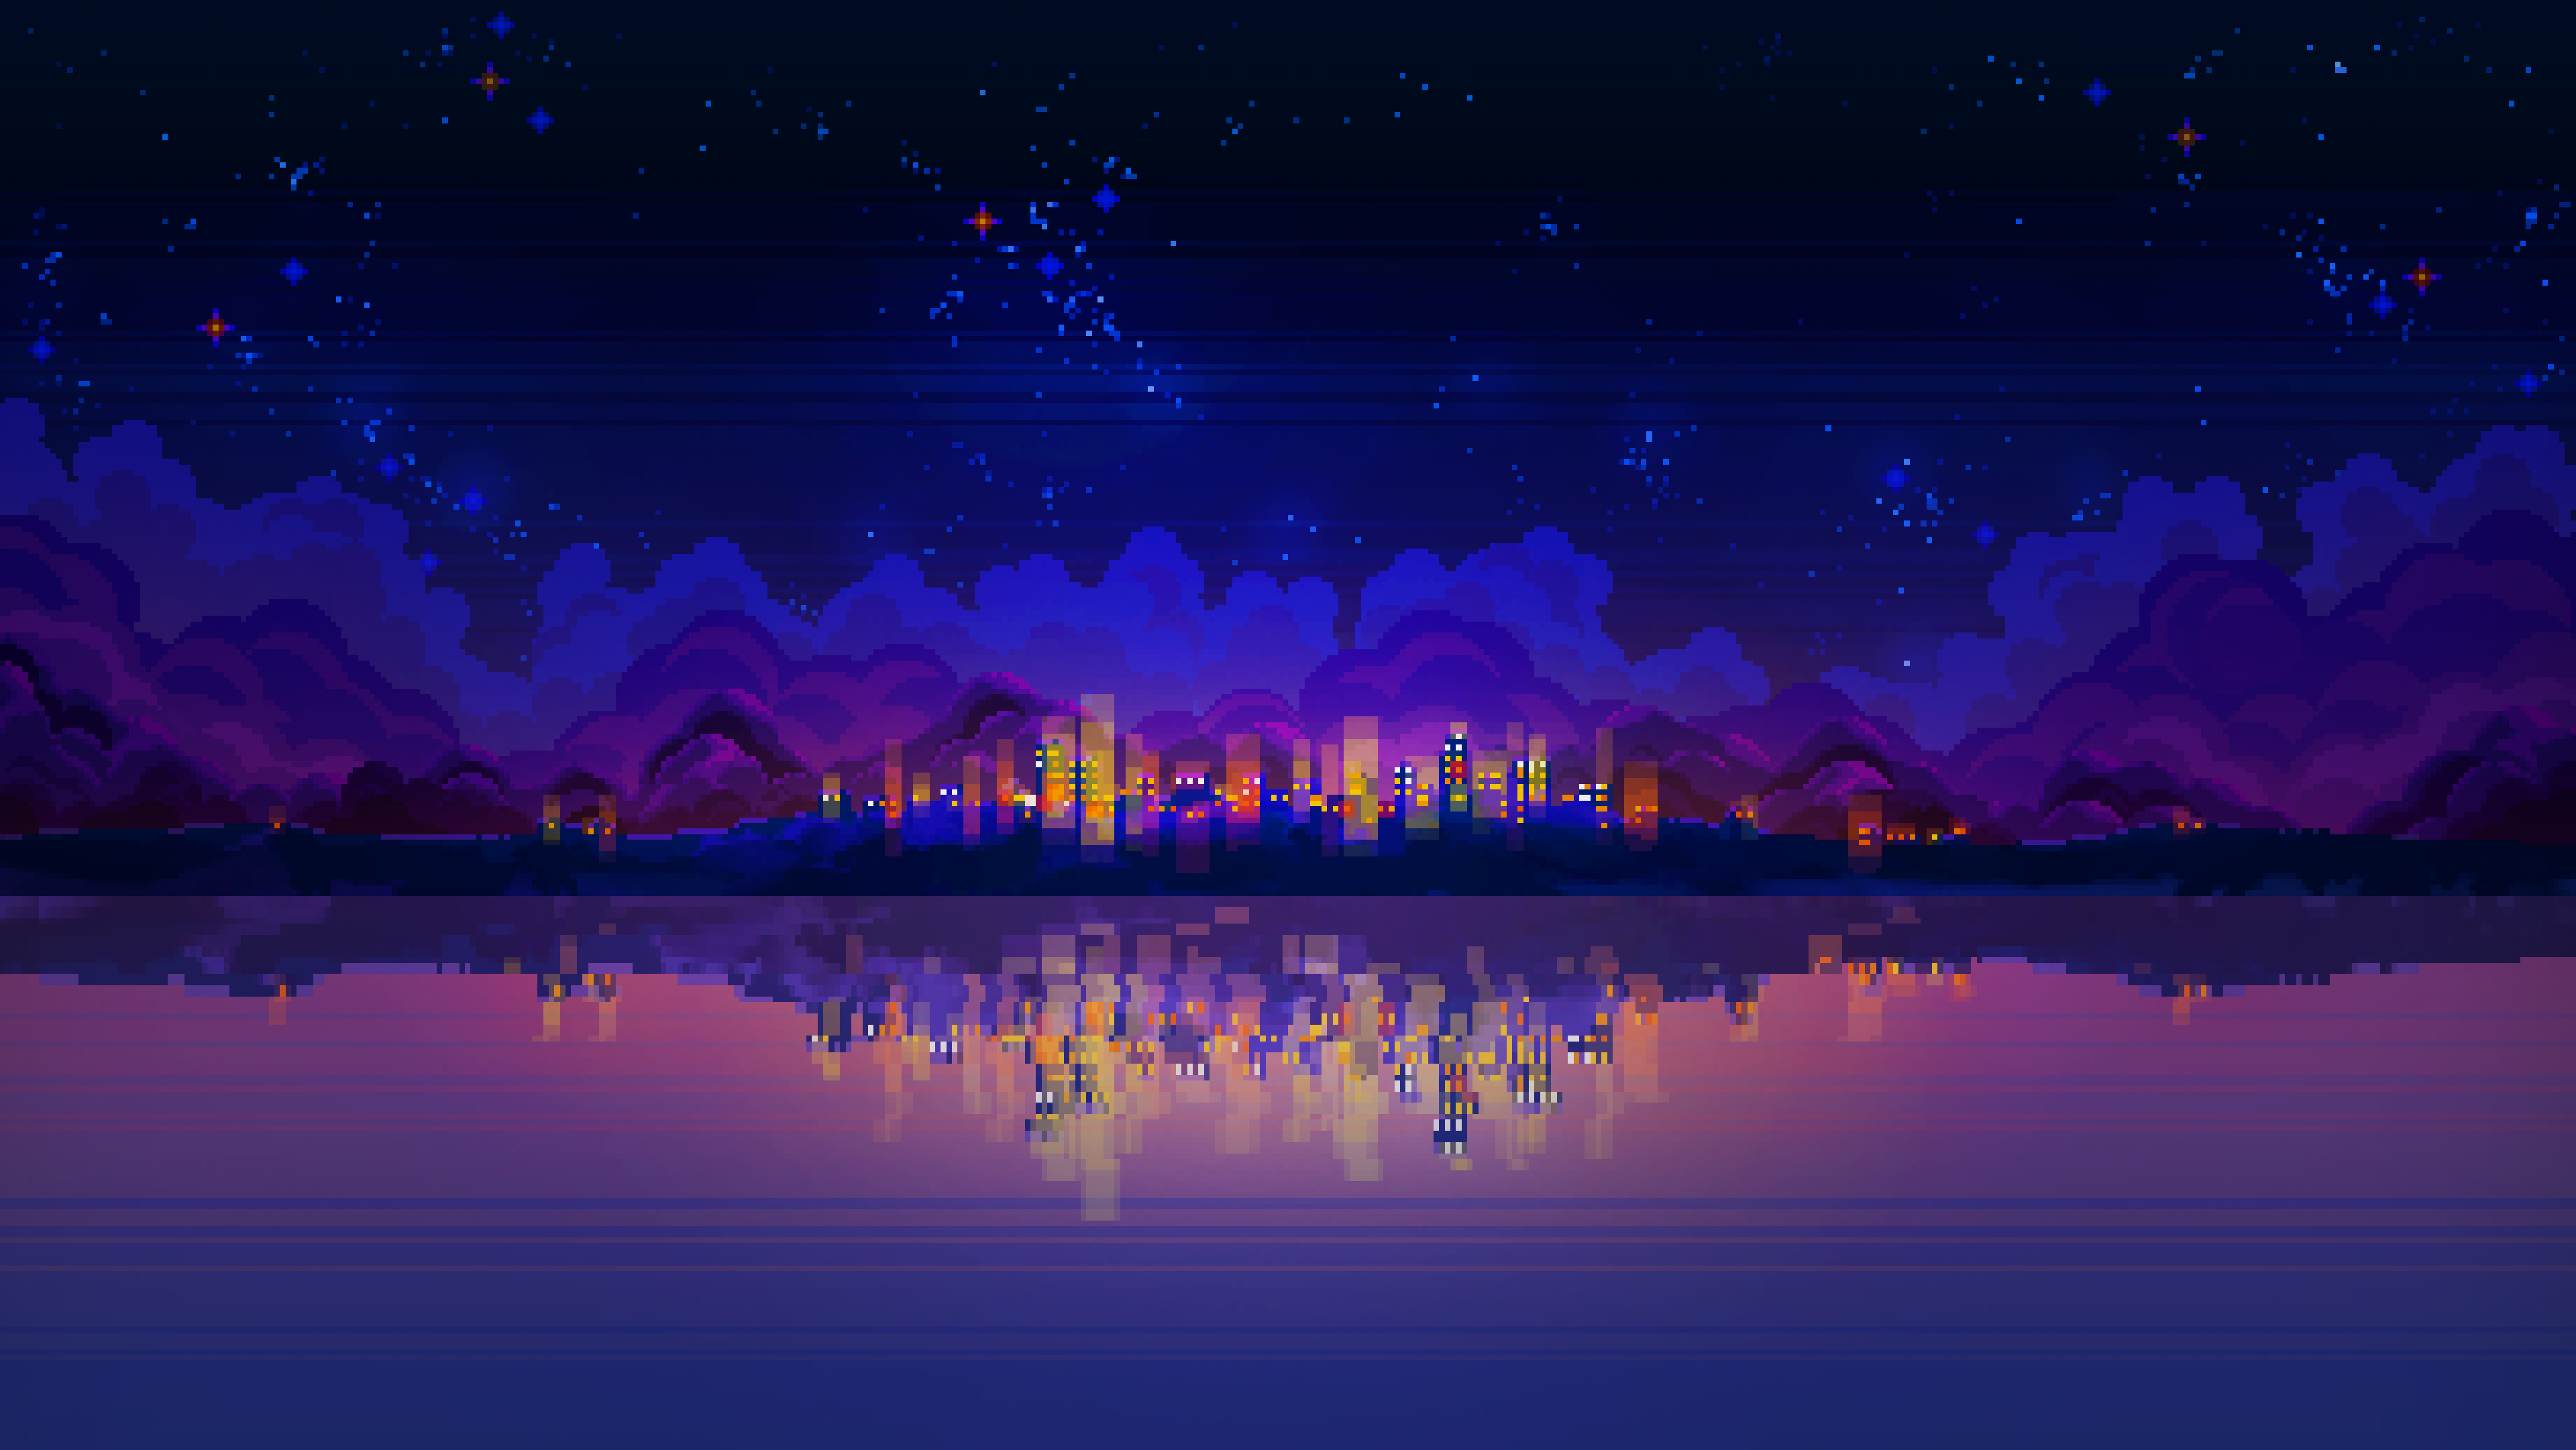 Pixel Art City Building Water Clouds Reflection Stars Starry Night 3840x2162